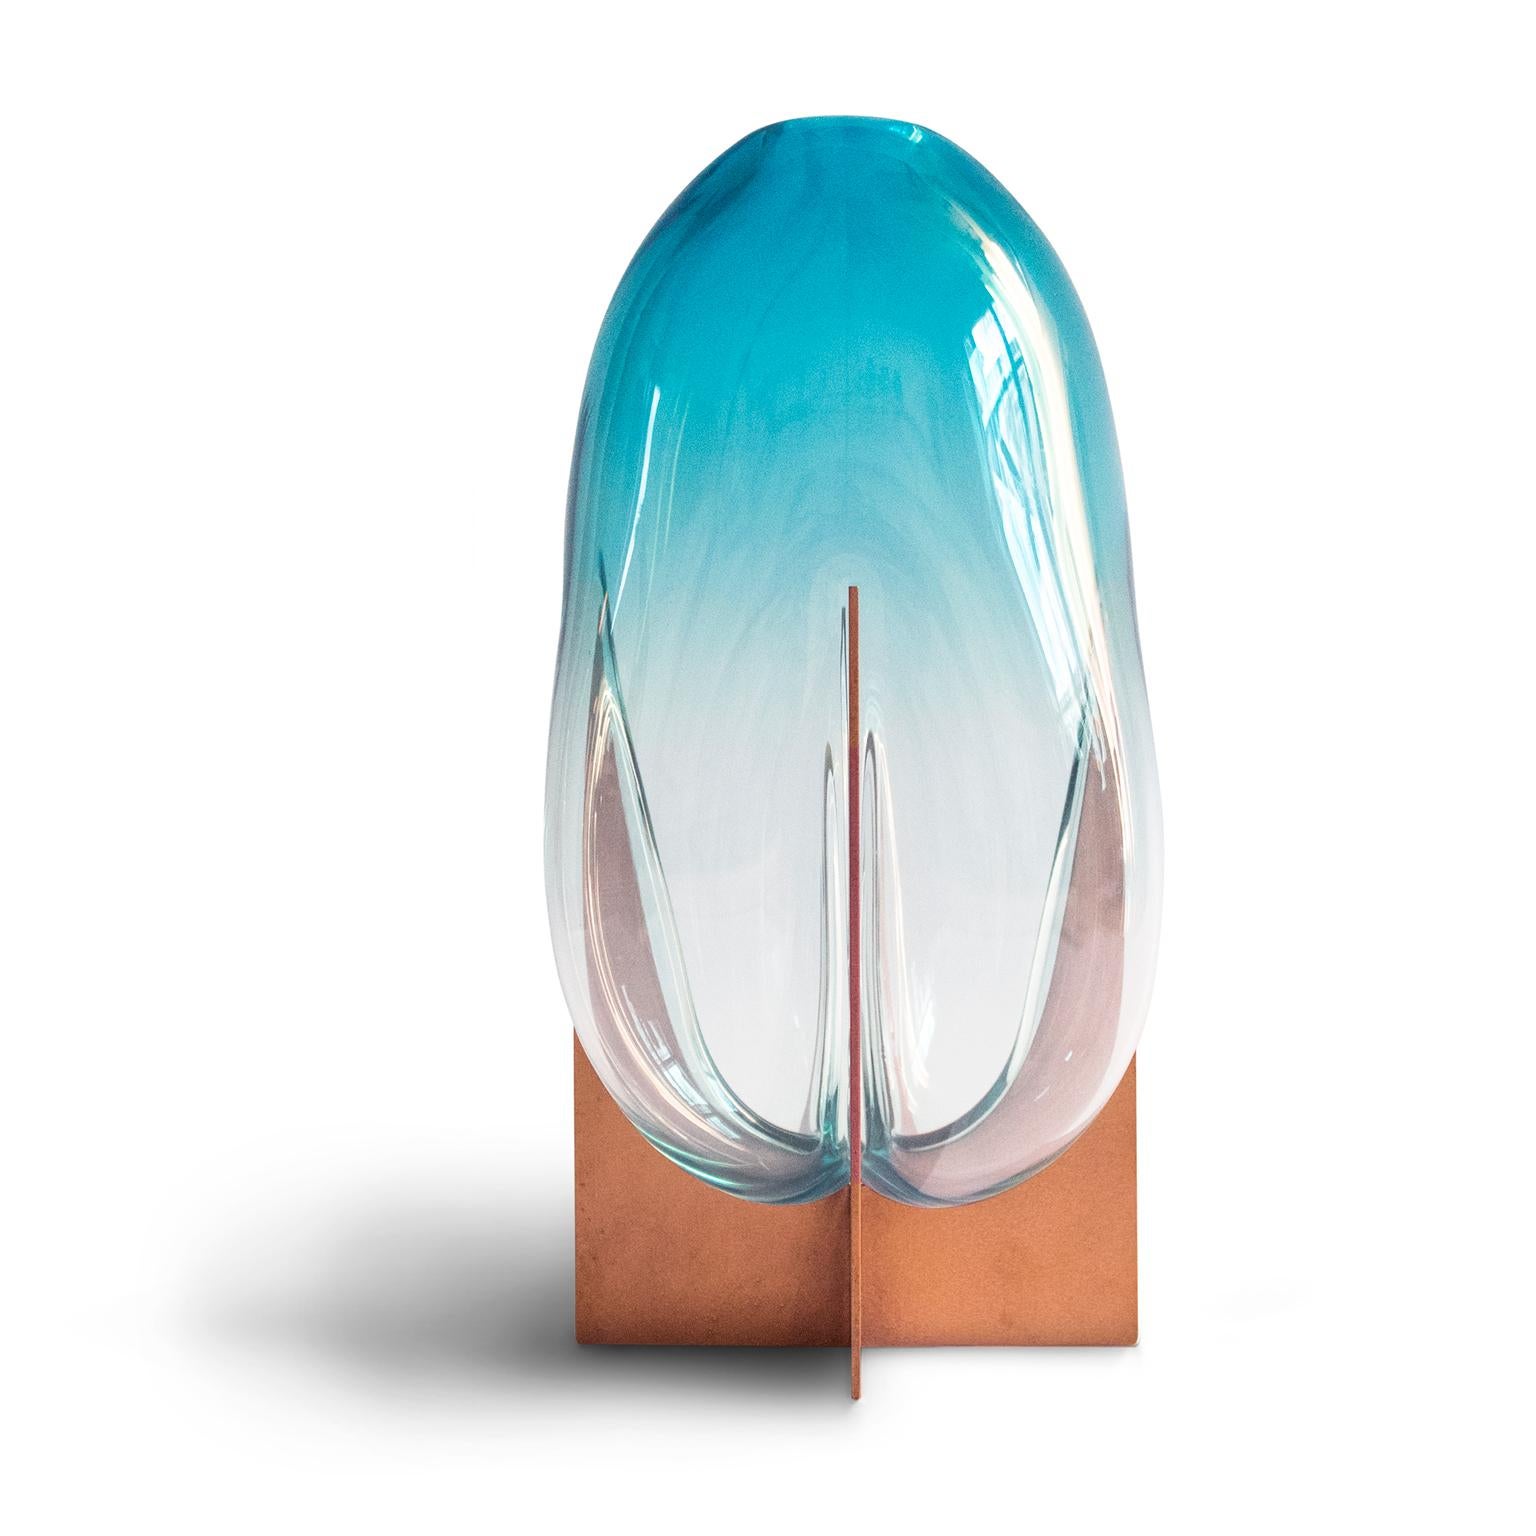 Lara Bohinc’s collection is inspired by her encounters with Venice. Metal frames hold Bohinc’s Murano glass vases and are reminiscent of the foundations upon which Venice was built: the metal is strong, rigid and geometric; the glass likes water,